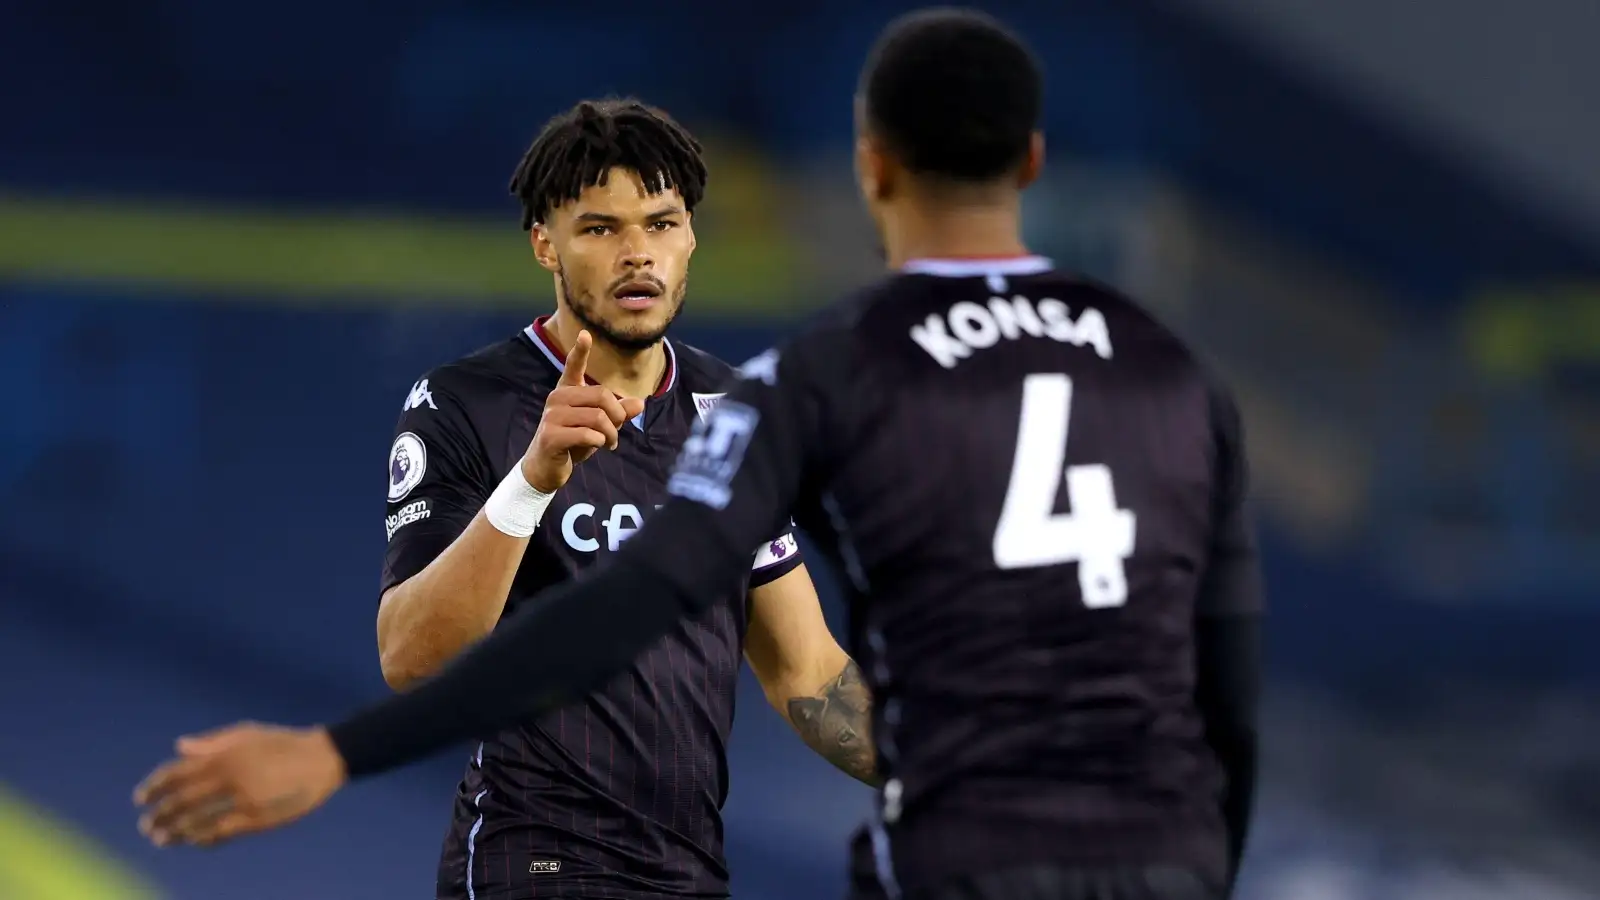 Tyrone Mings and Ezri Konsaexchange words at the end of the Premier League match at Elland Road